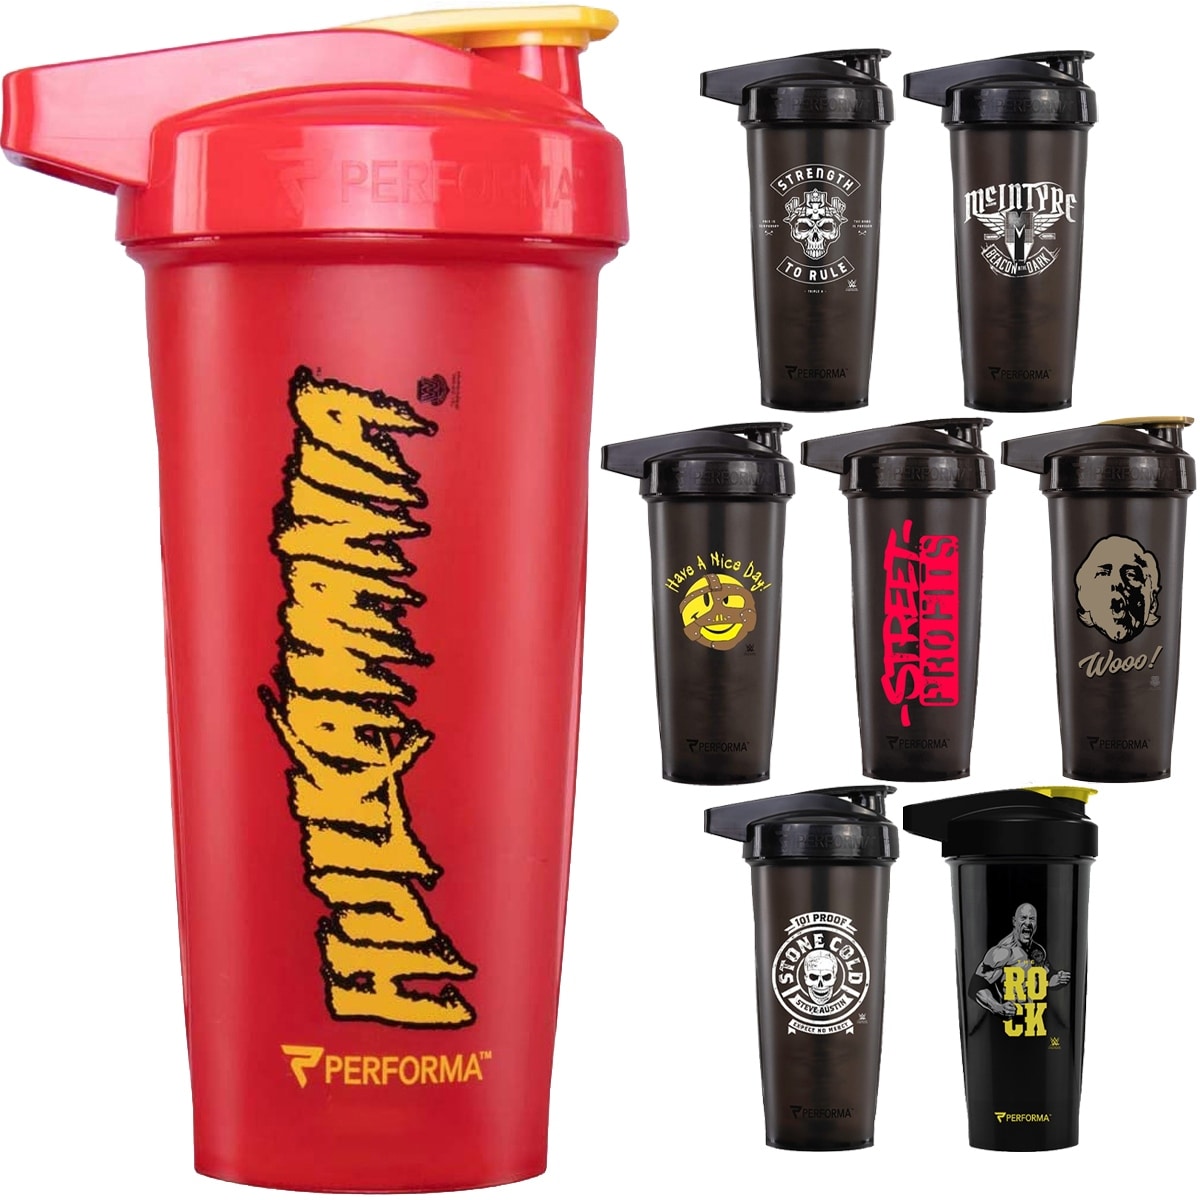 WWE Shop: EXCLUSIVE WWE x G FUEL SHAKER CUPS AVAILABLE NOW!